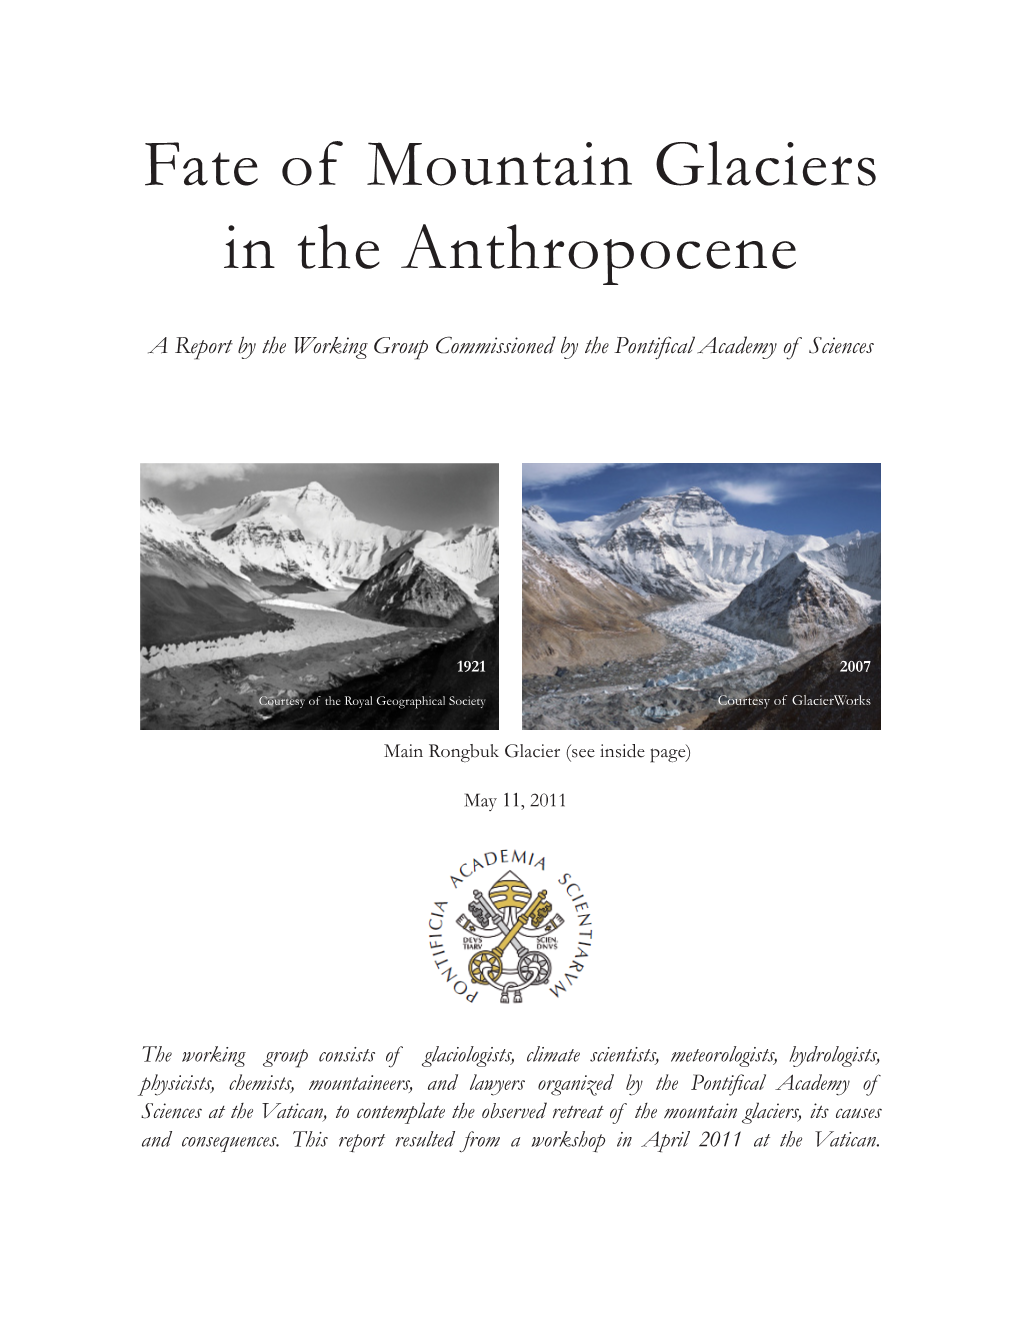 Fate of Mountain Glaciers in the Anthropocene